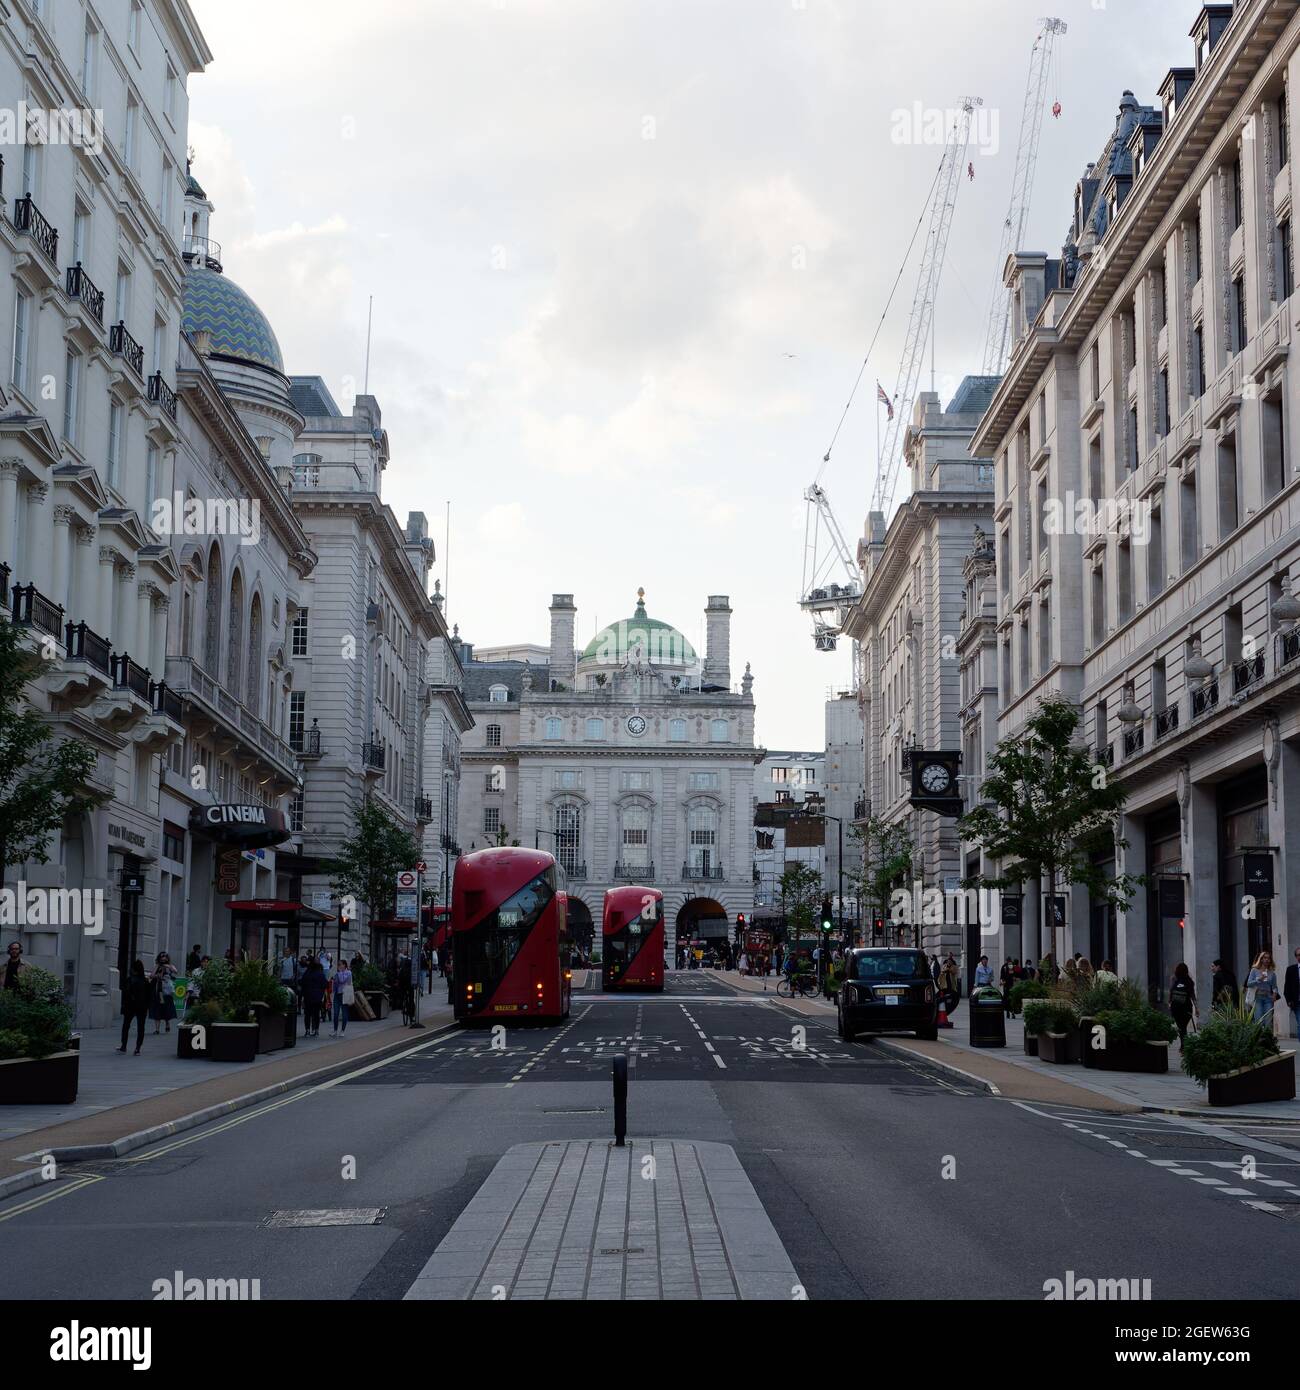 London, Greater London, England, August 10 2021: Looking towards the former Alliance Life Insurance building in Piccadilly Circus. Stock Photo